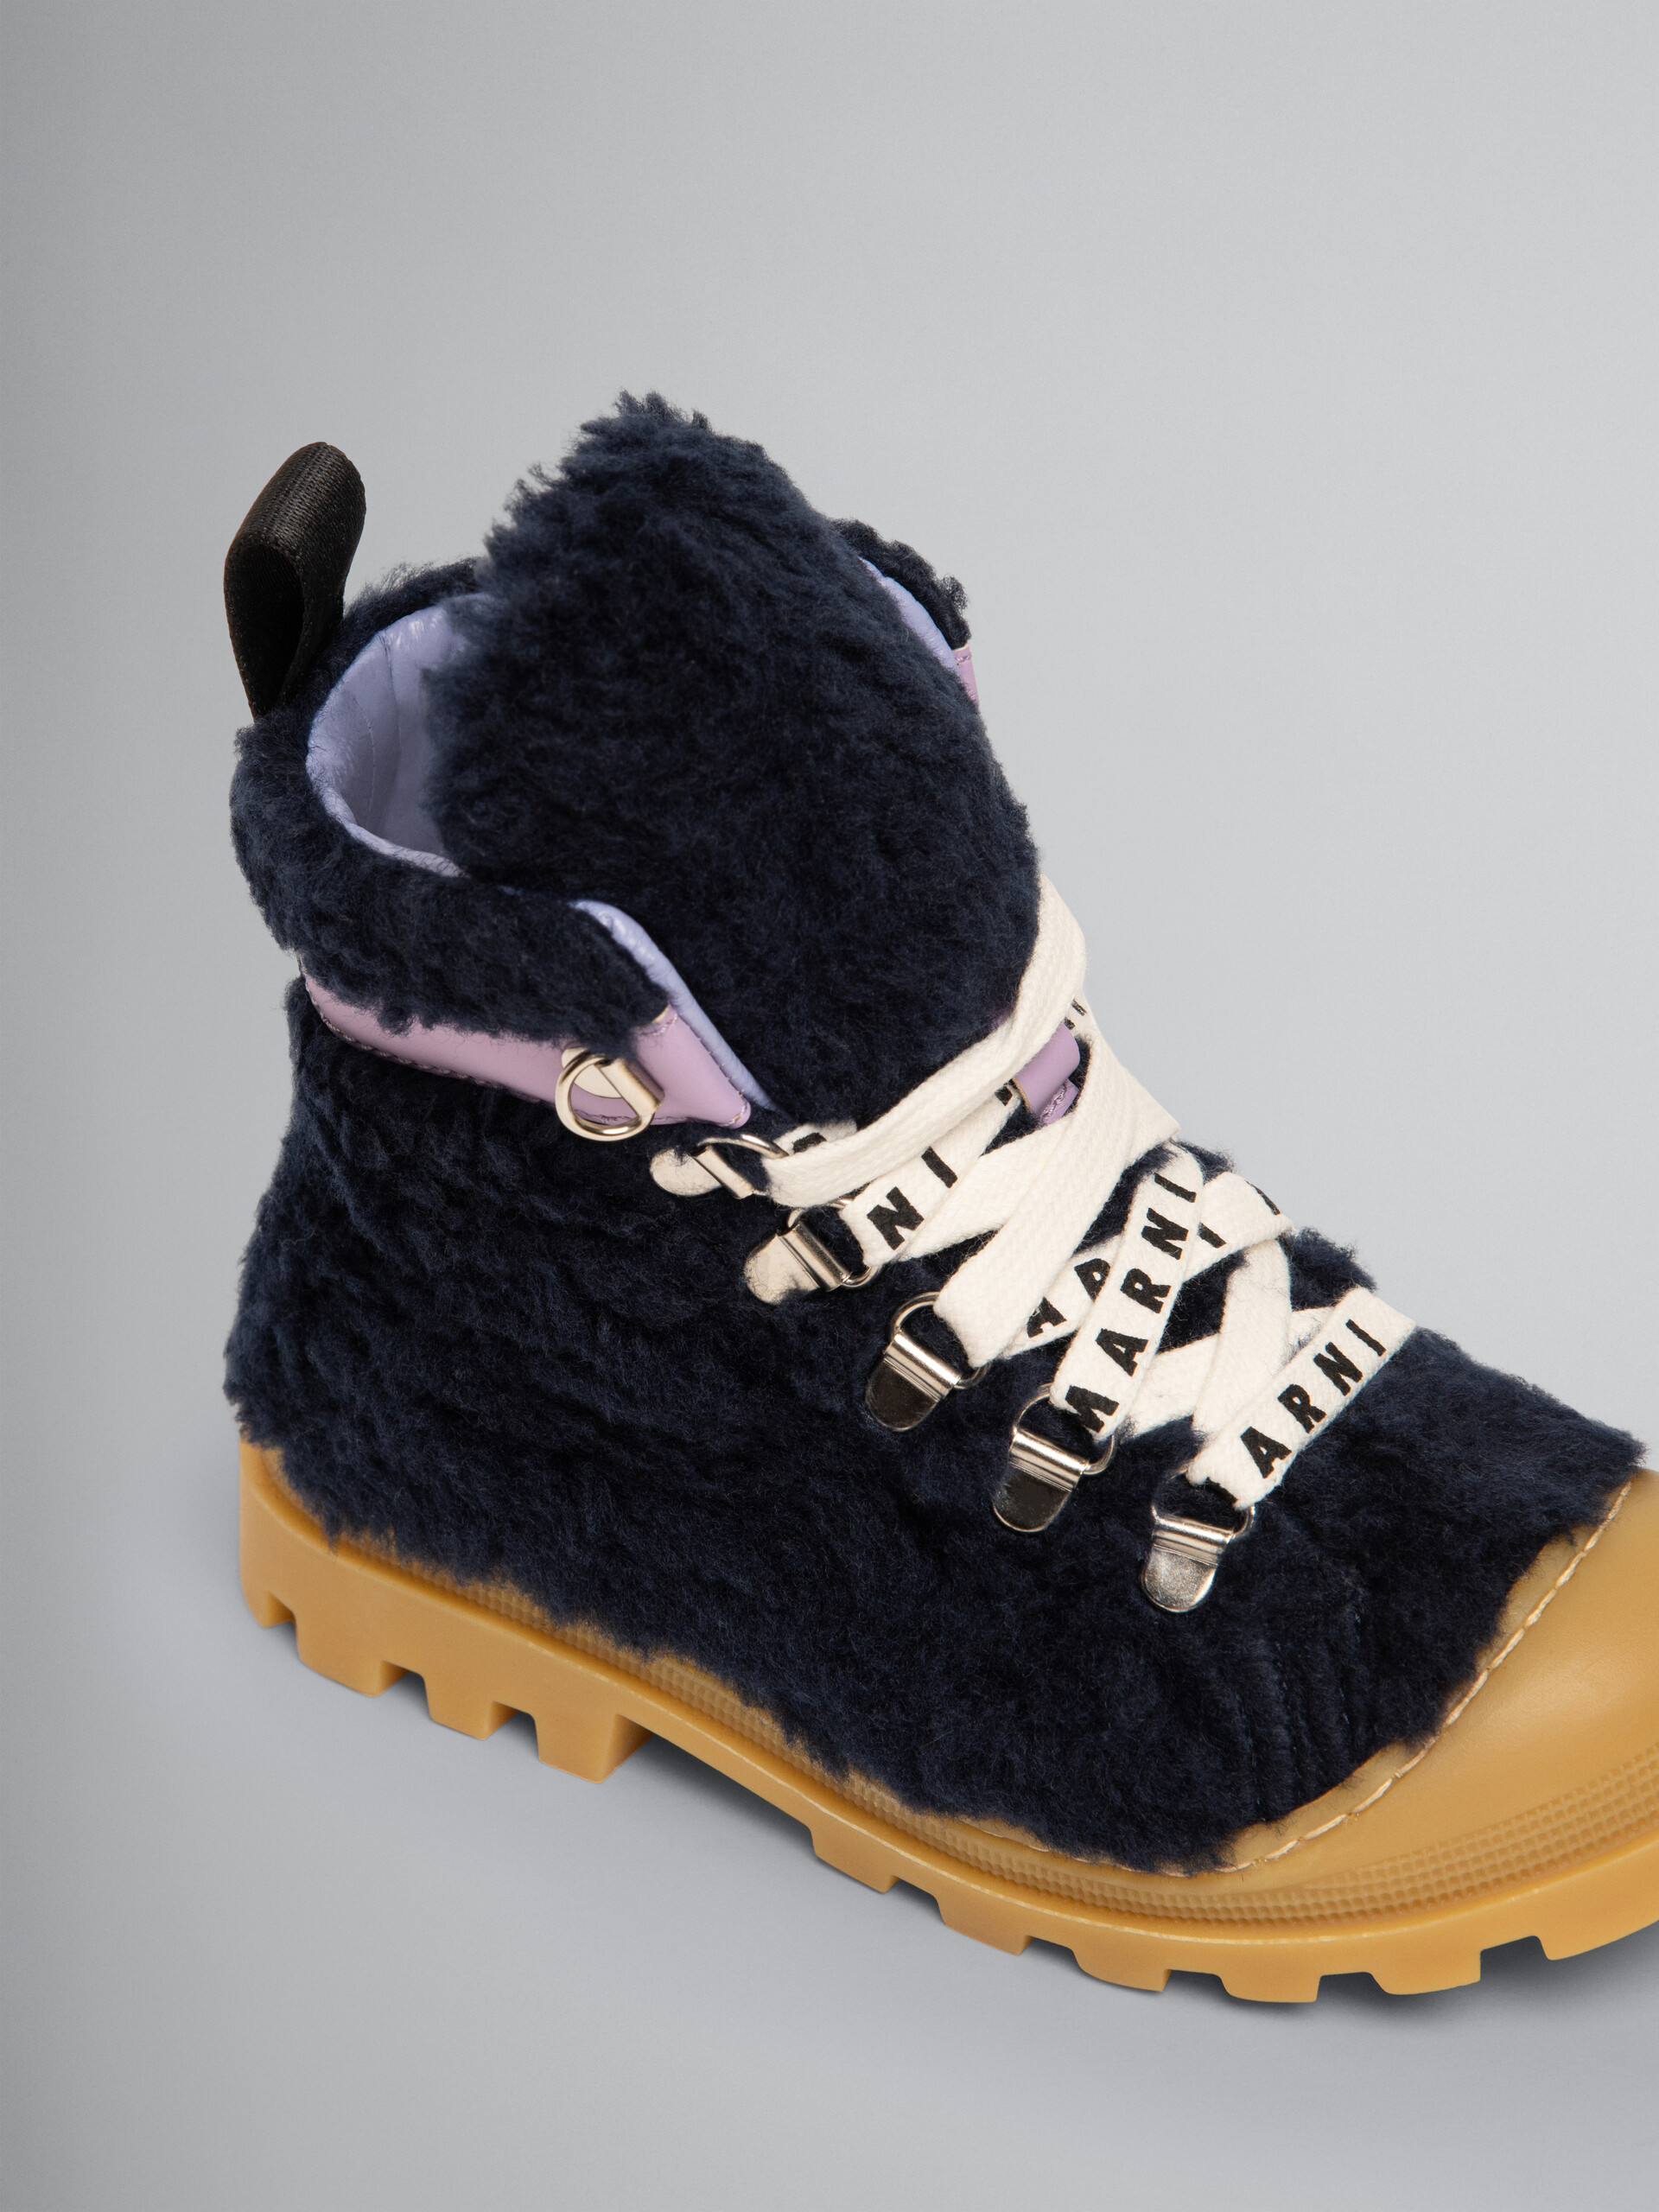 Black mountain boot - Other accessories - Image 4